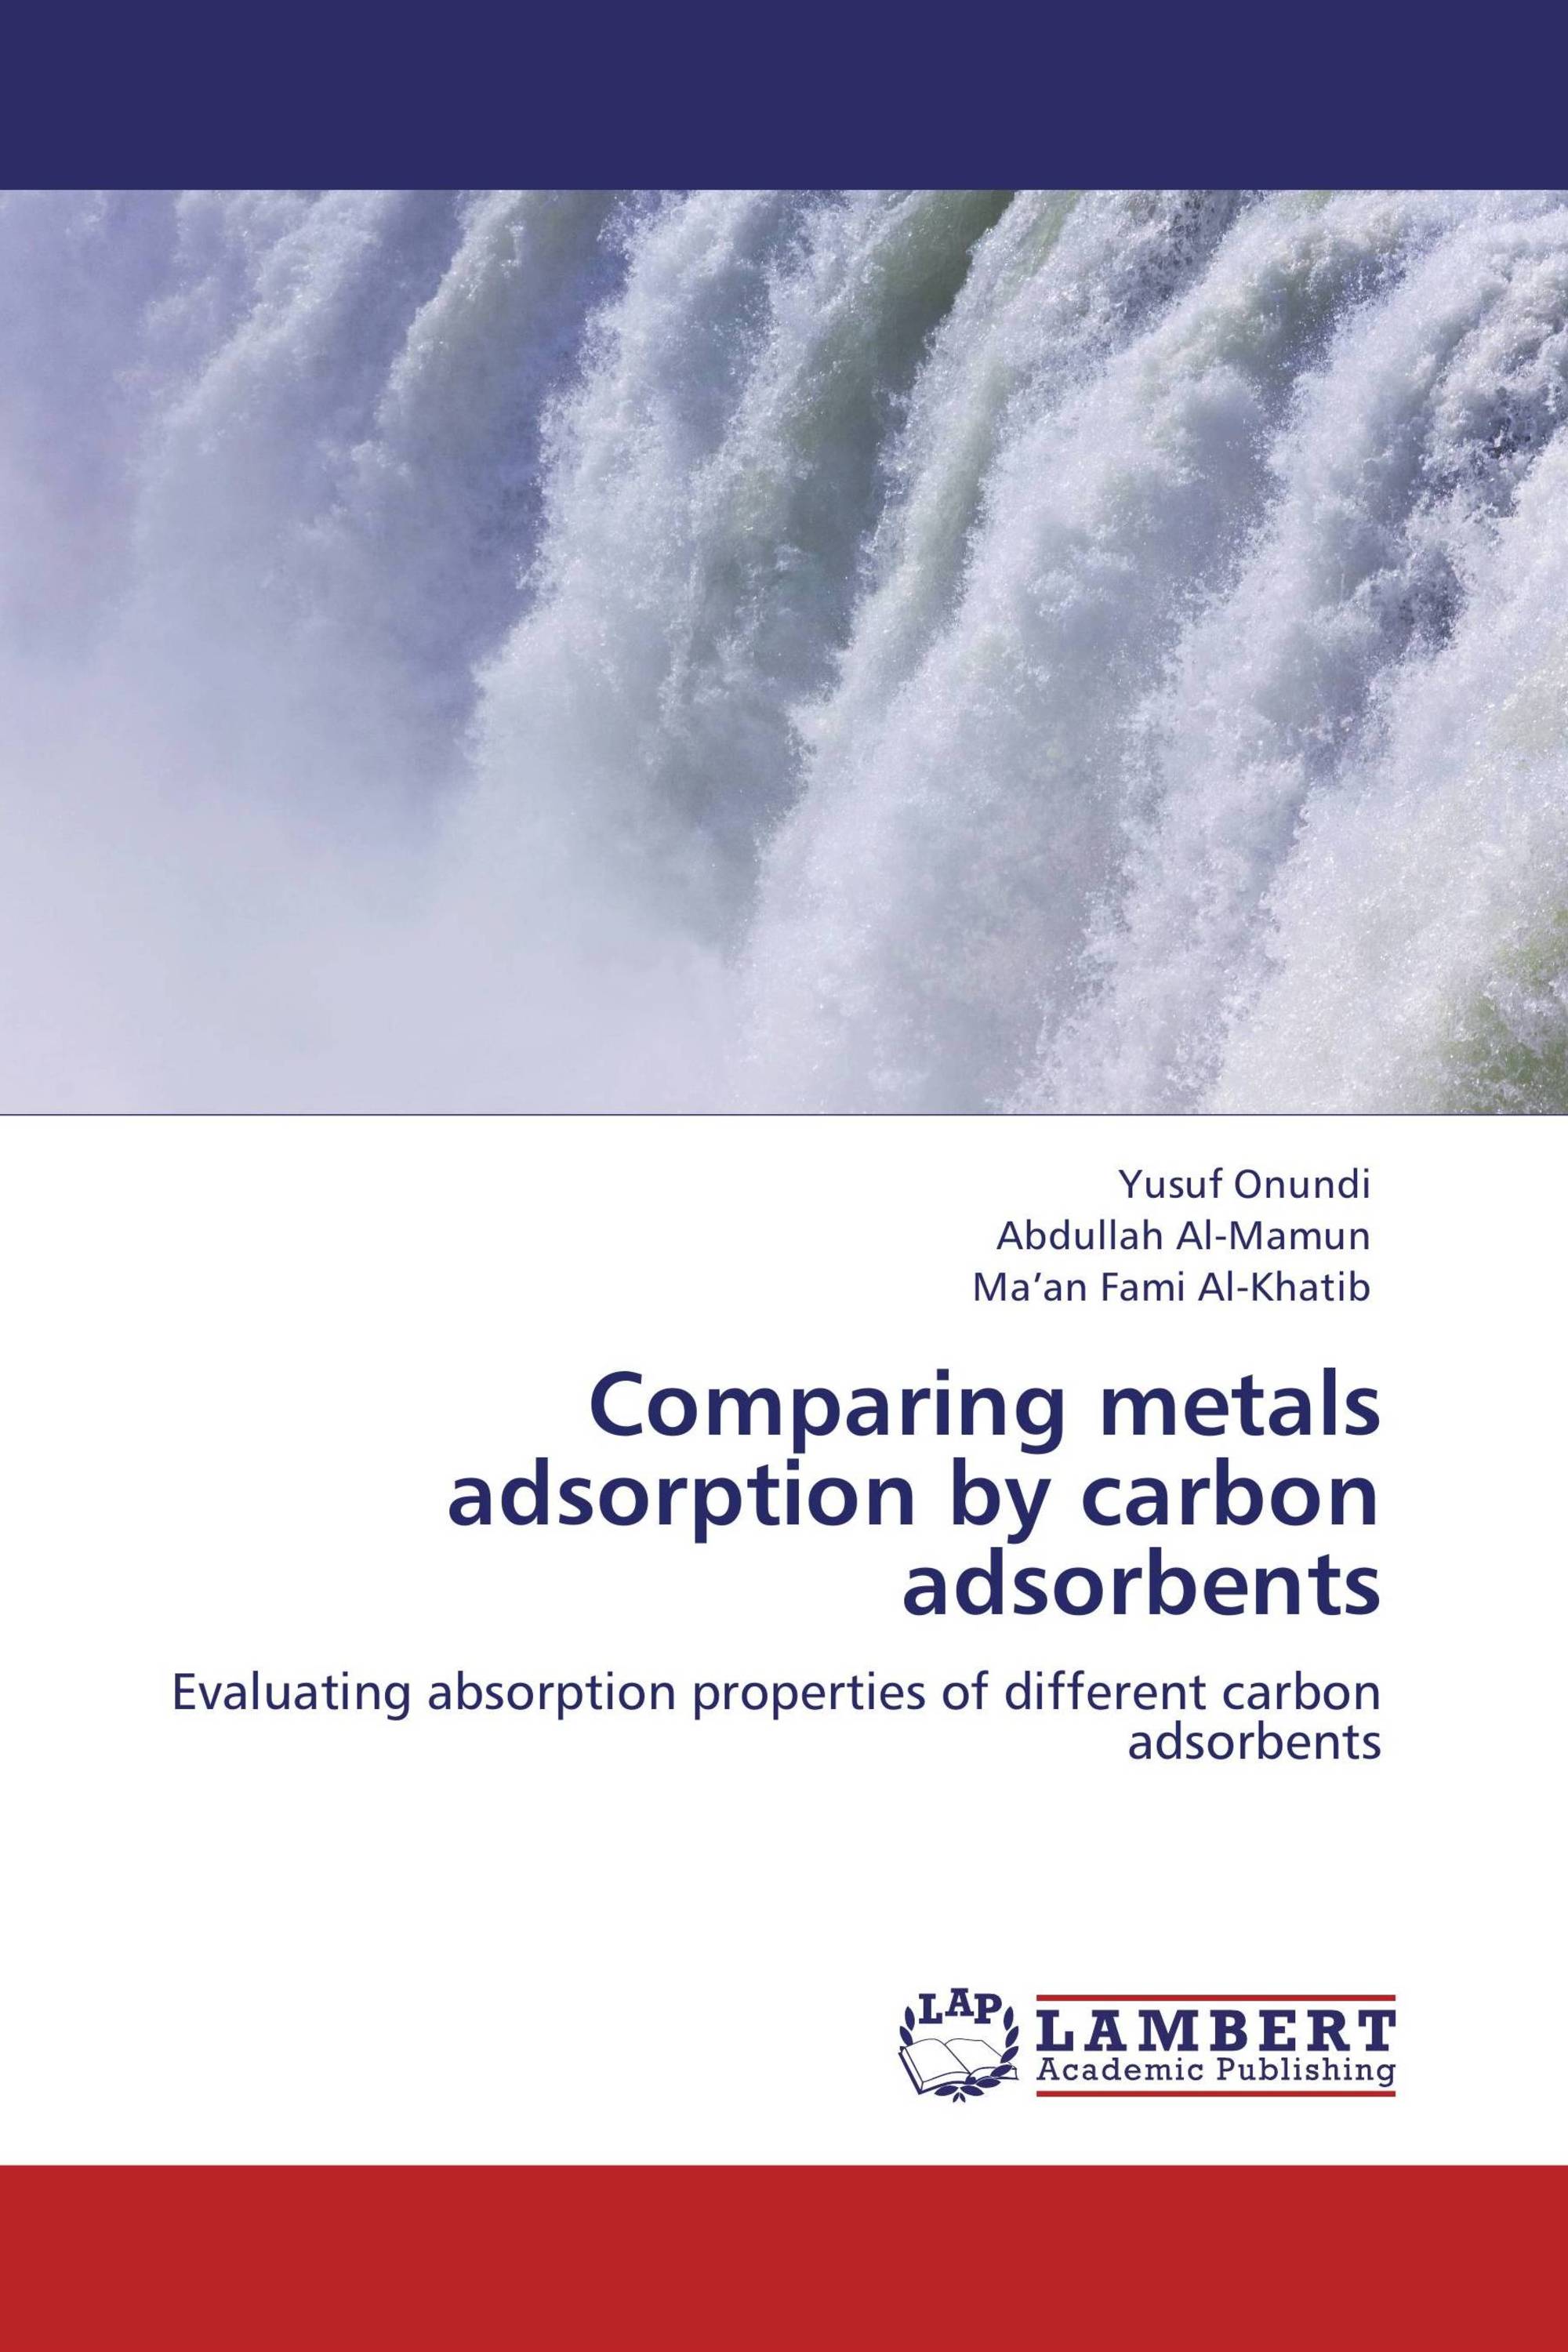 Comparing metals adsorption by carbon adsorbents